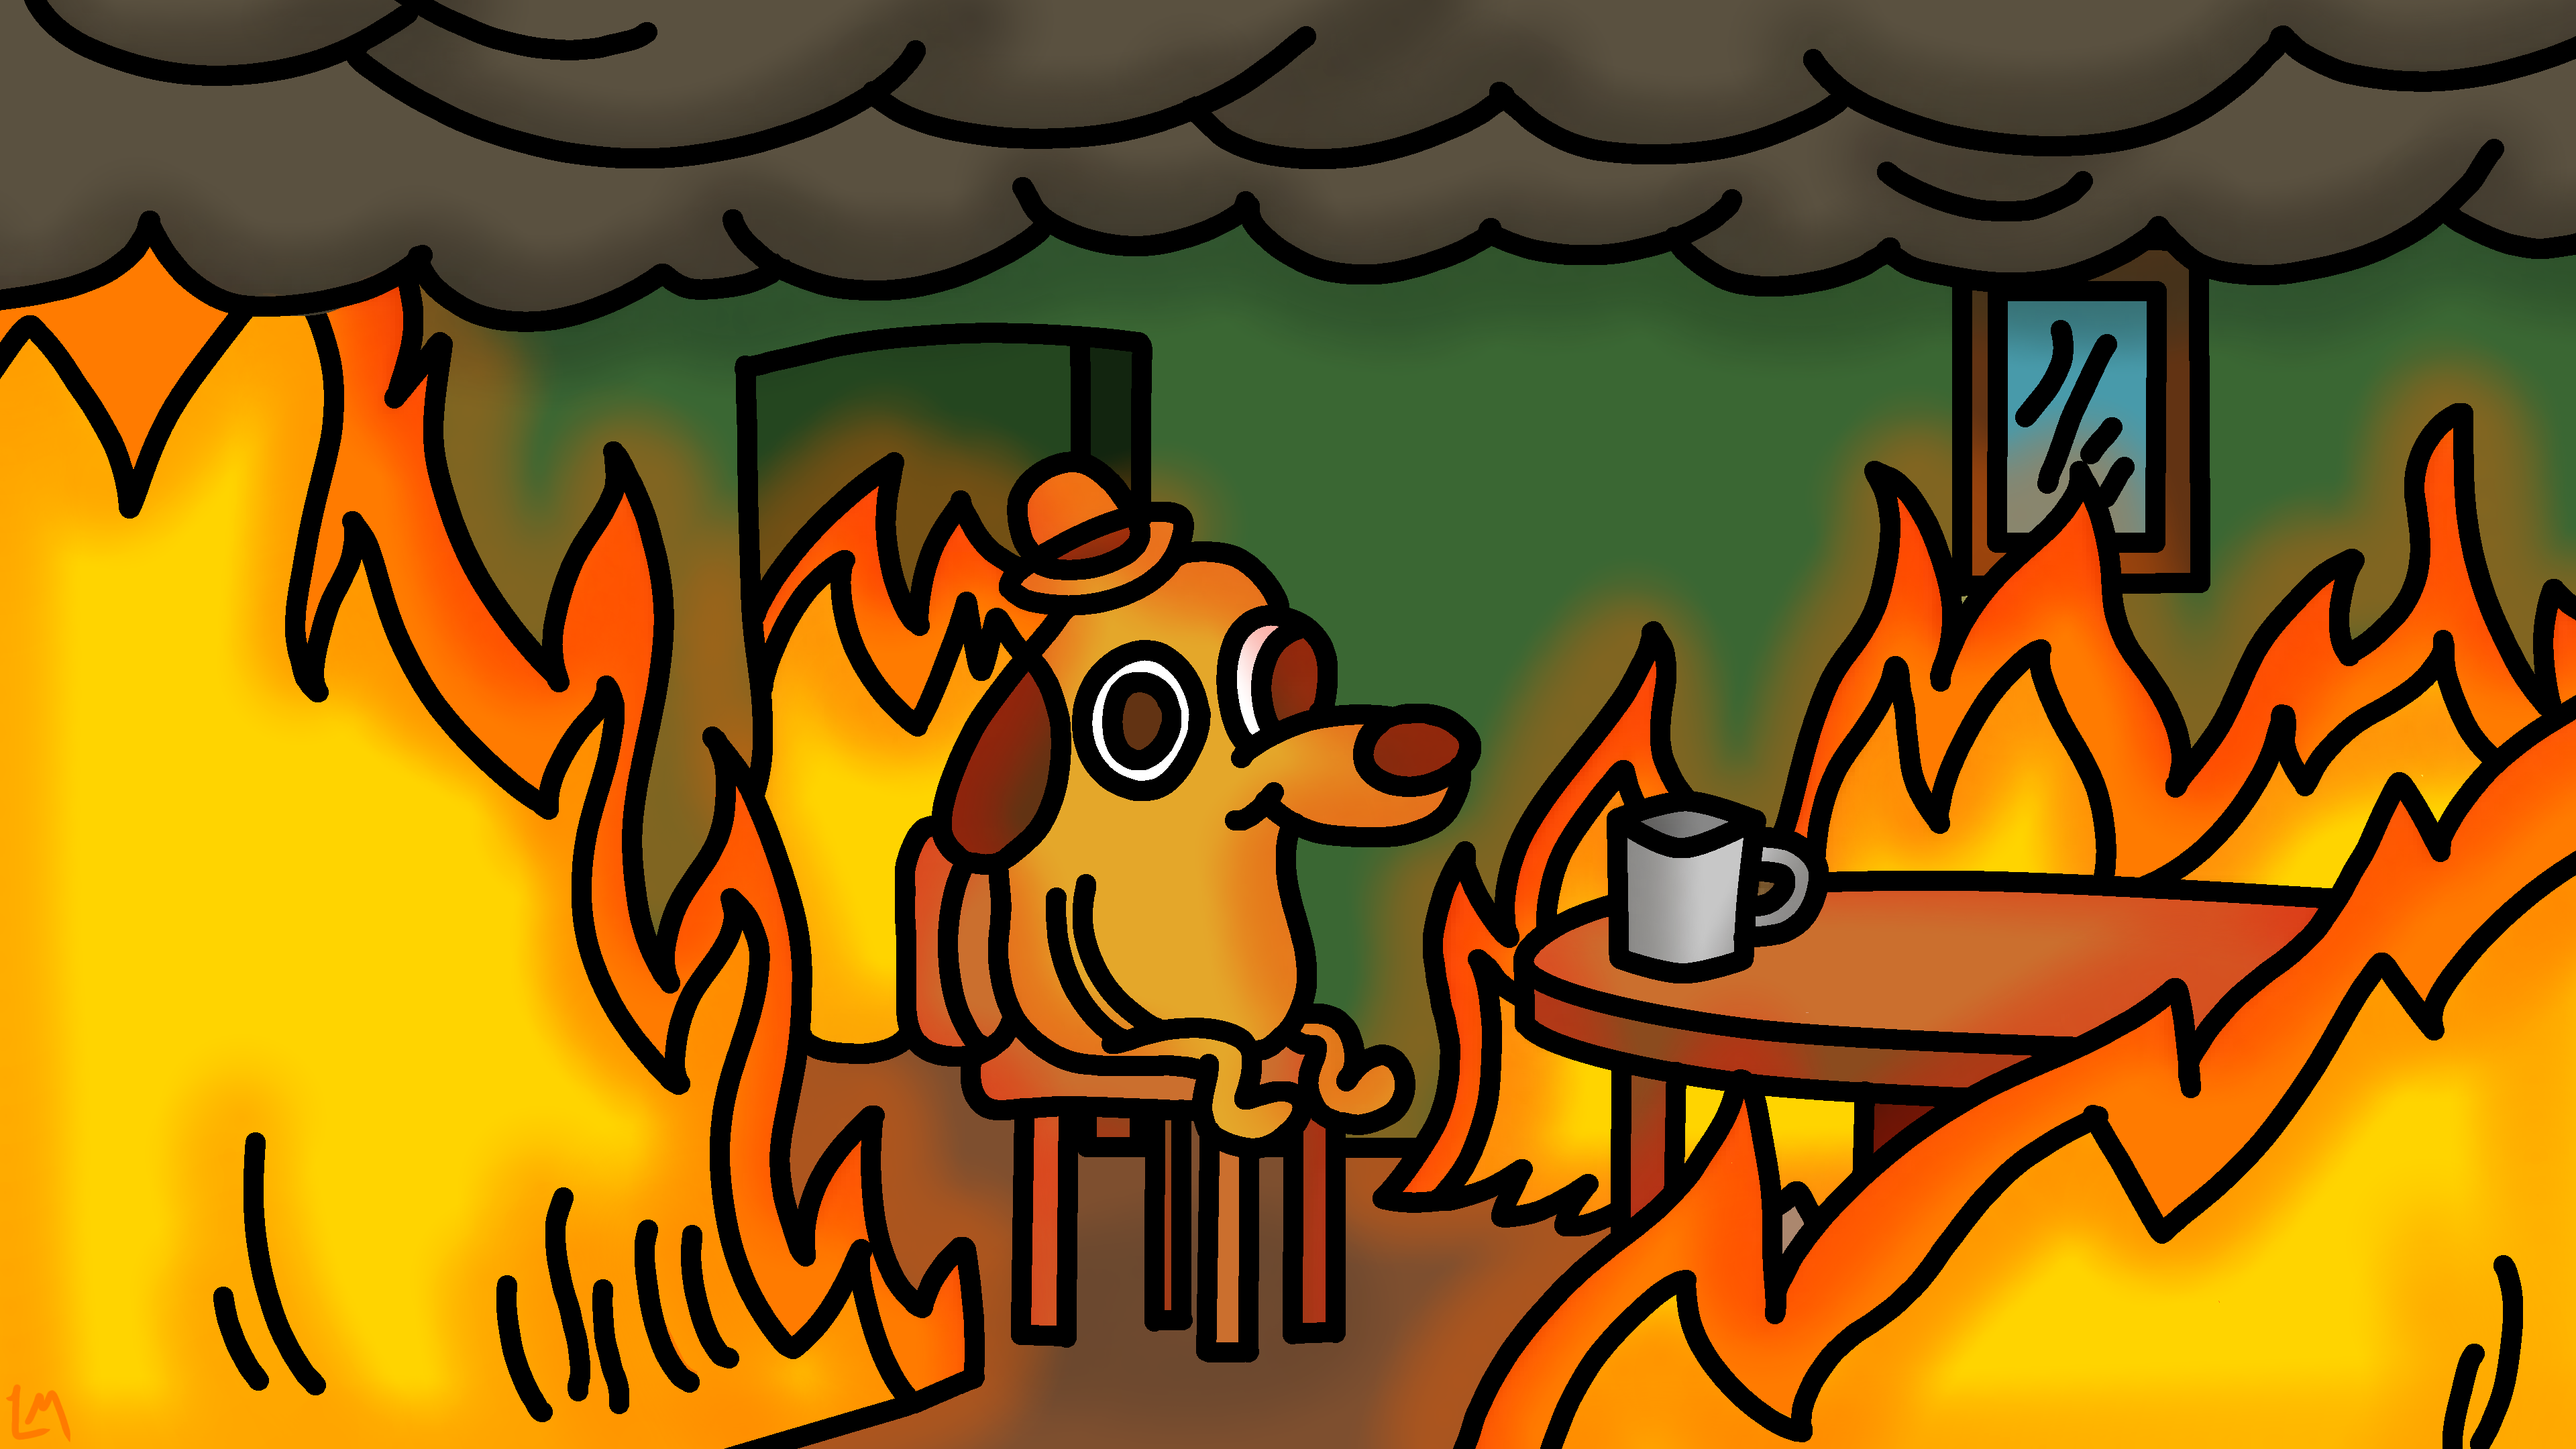 This Is Fine Meme, recreated by me in 4k